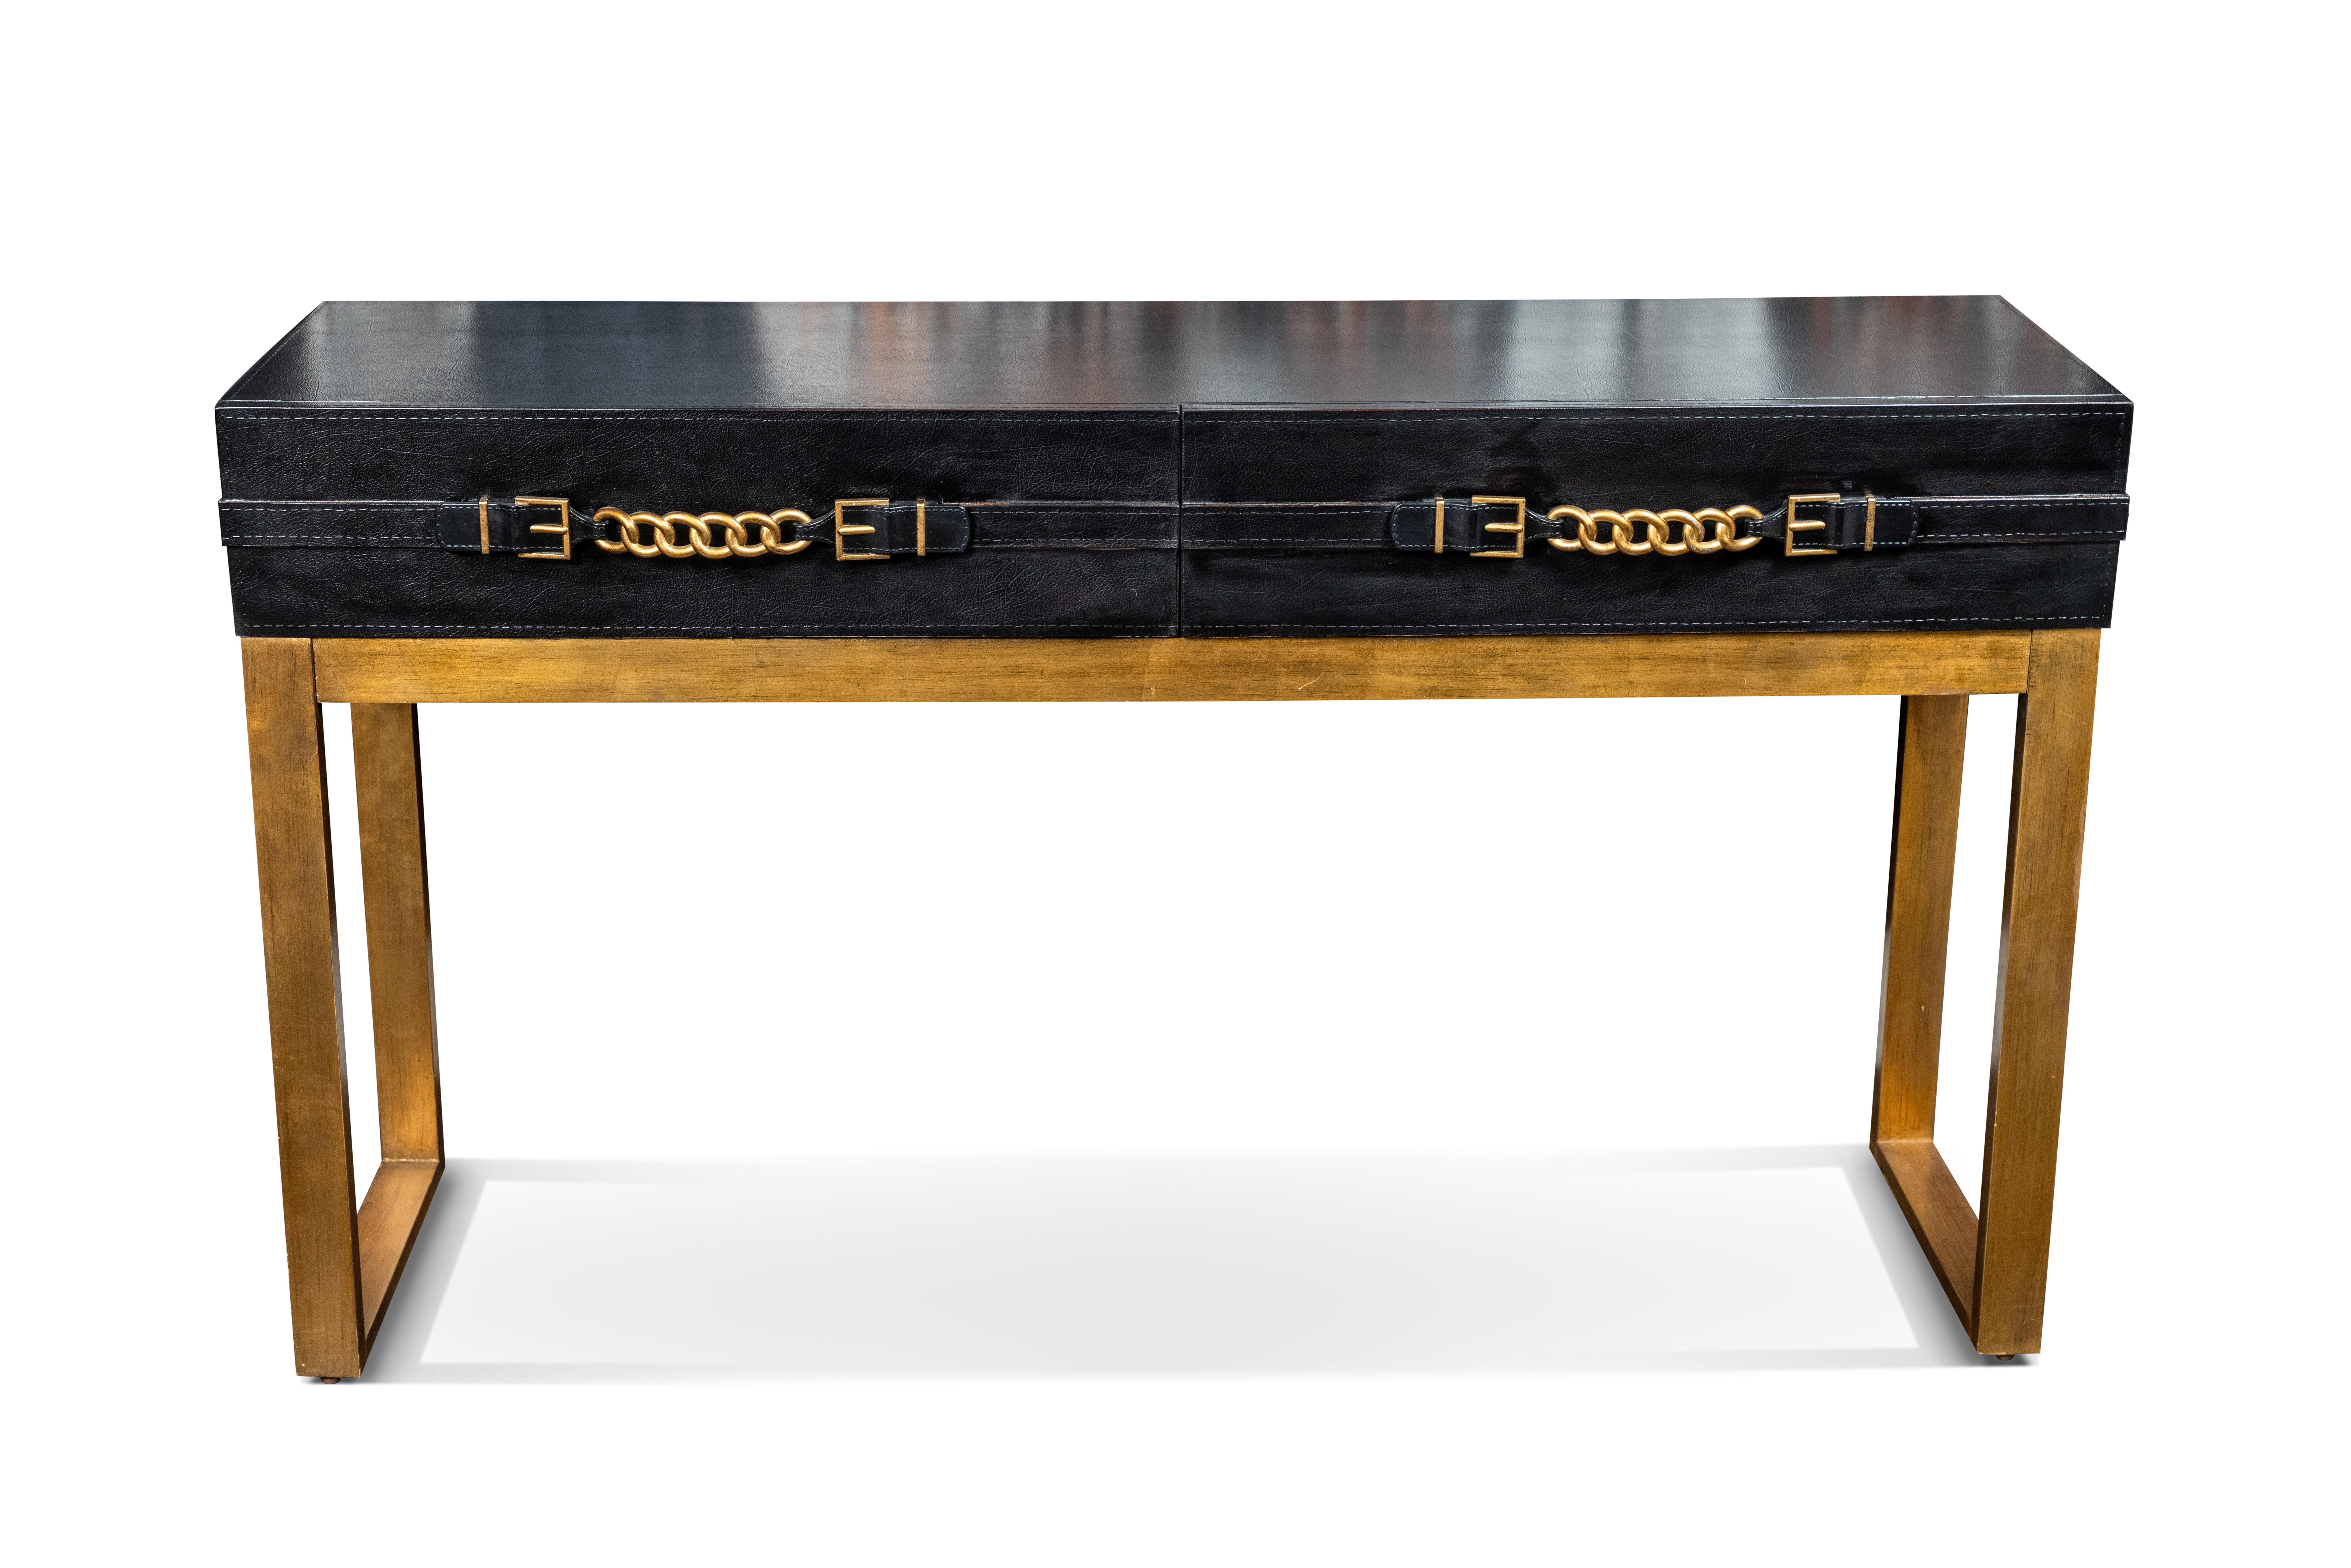 Chic console table with metal base and leather top, adorned with 